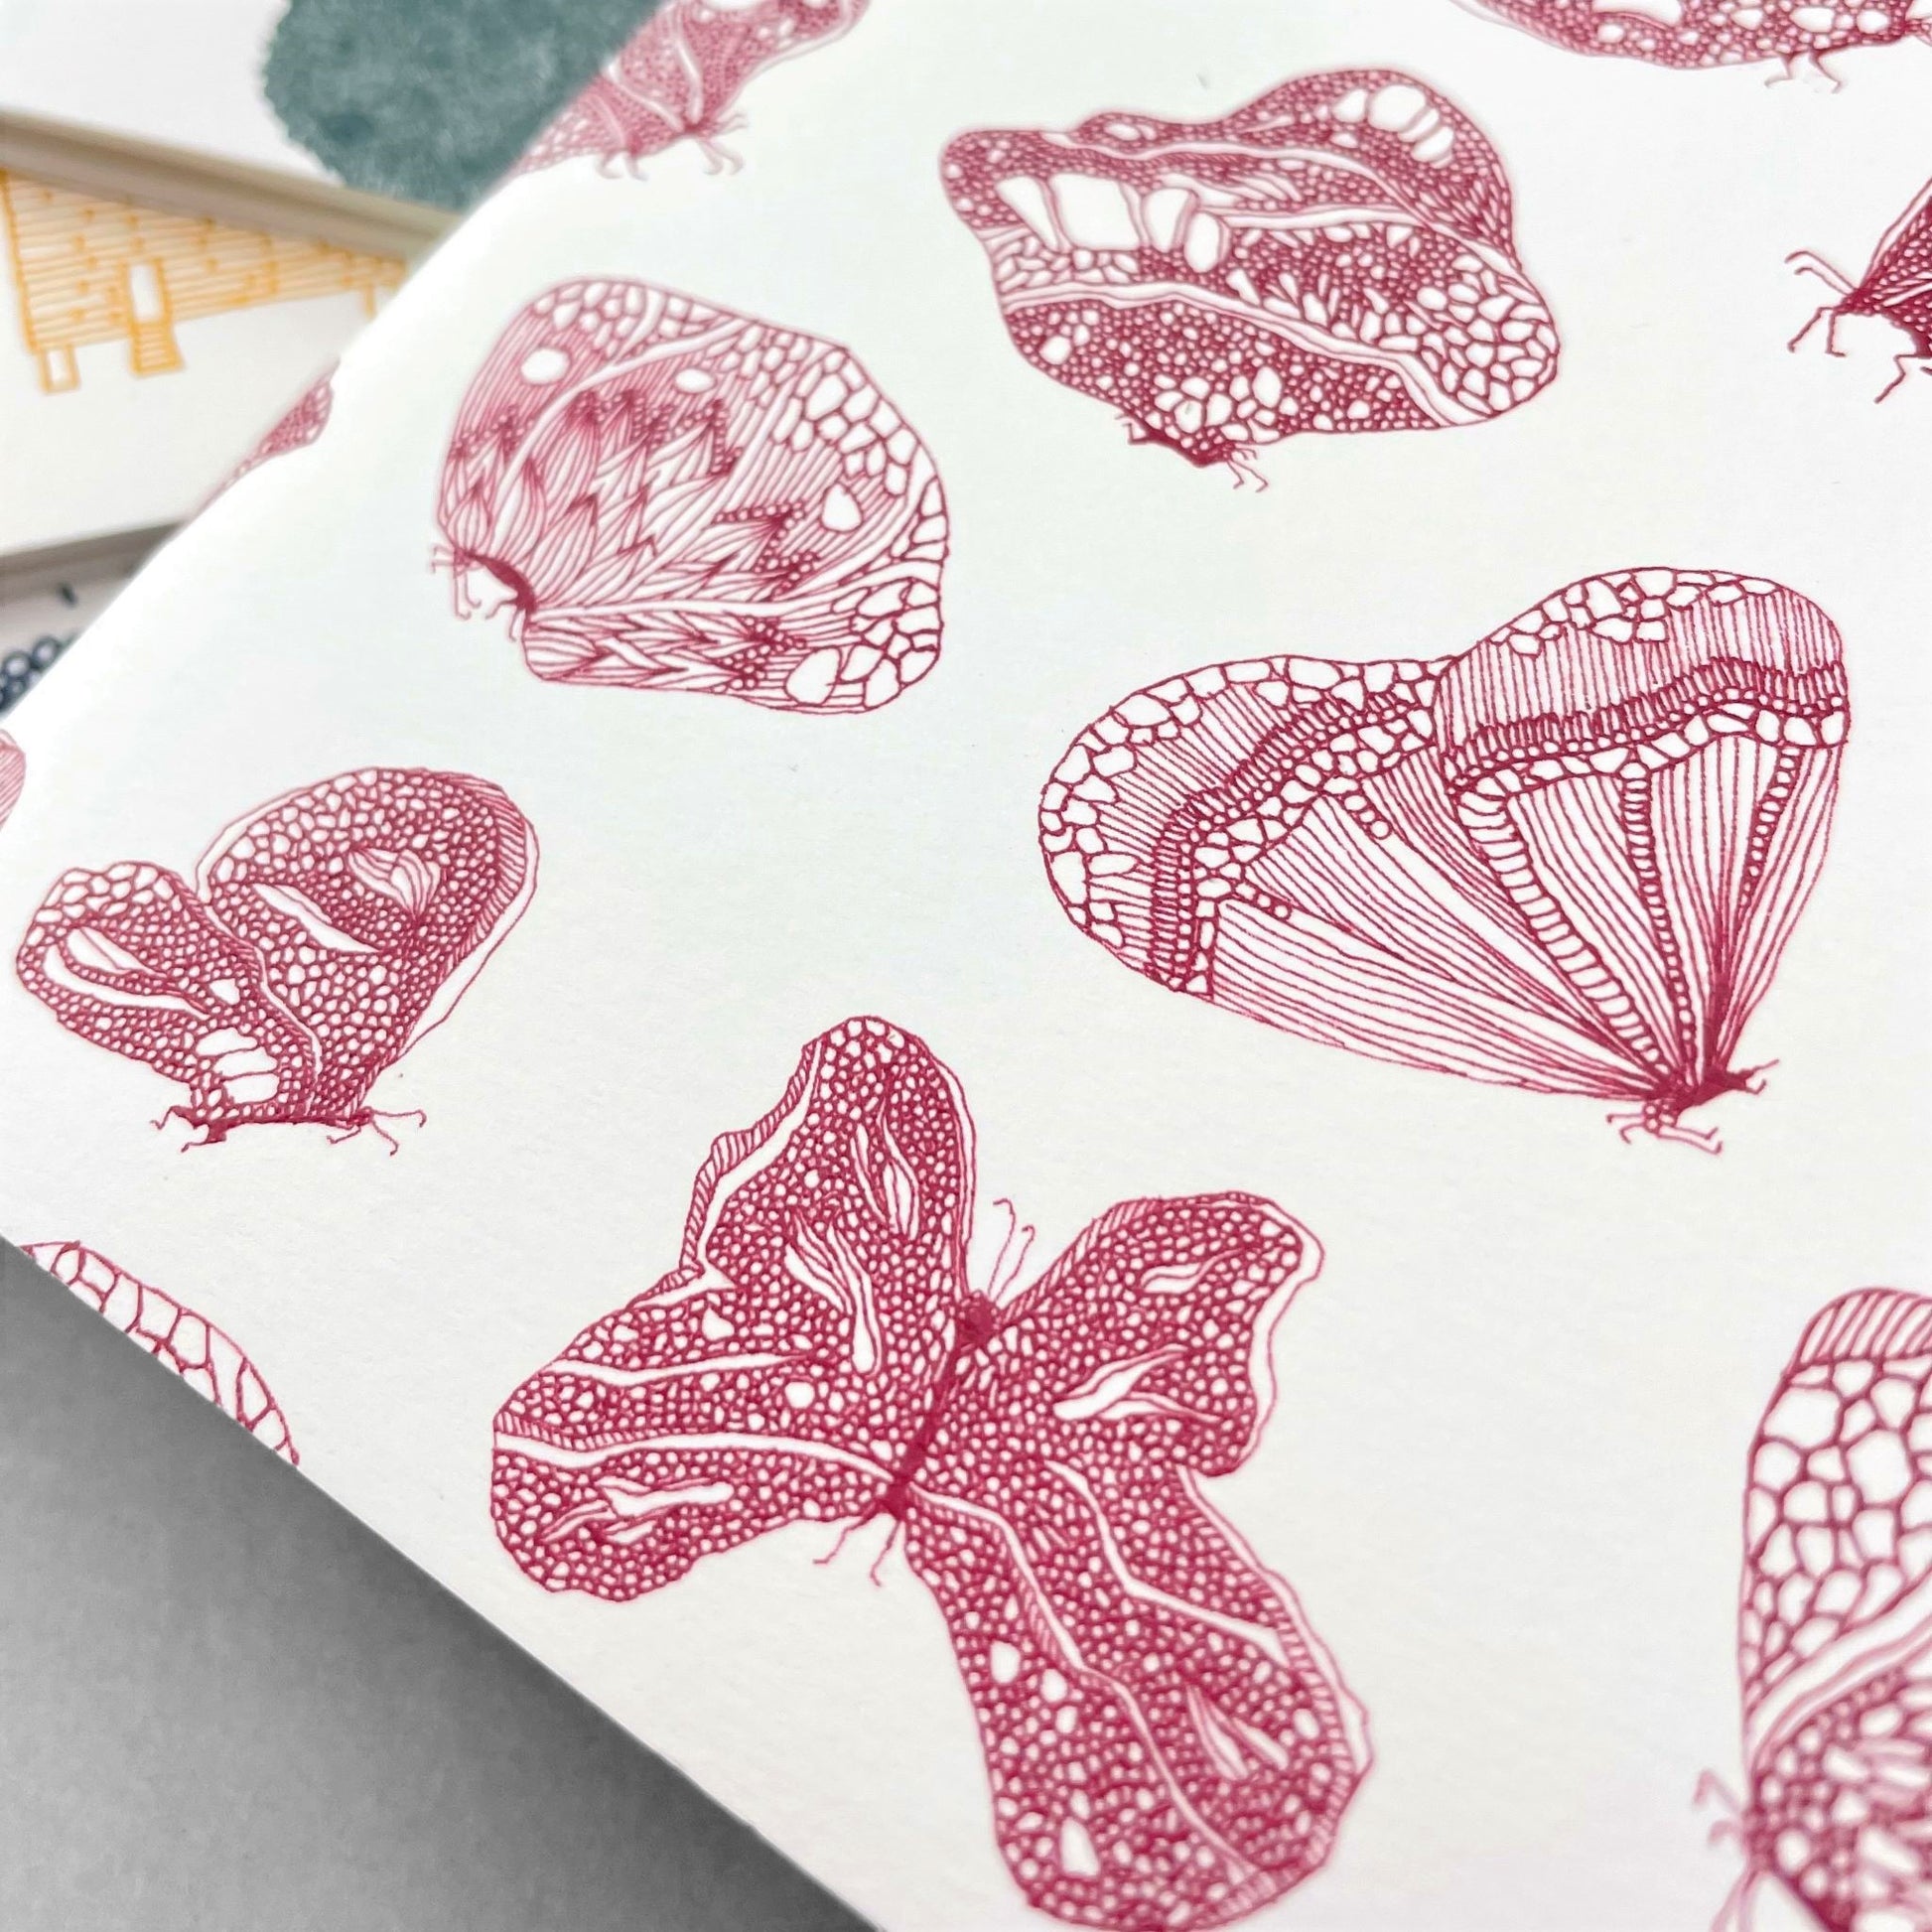 A5 slimline notebook with a delicate illustration of butterflies in burgundy on a ivory backdrop by Parisian brand Atelier Mouti